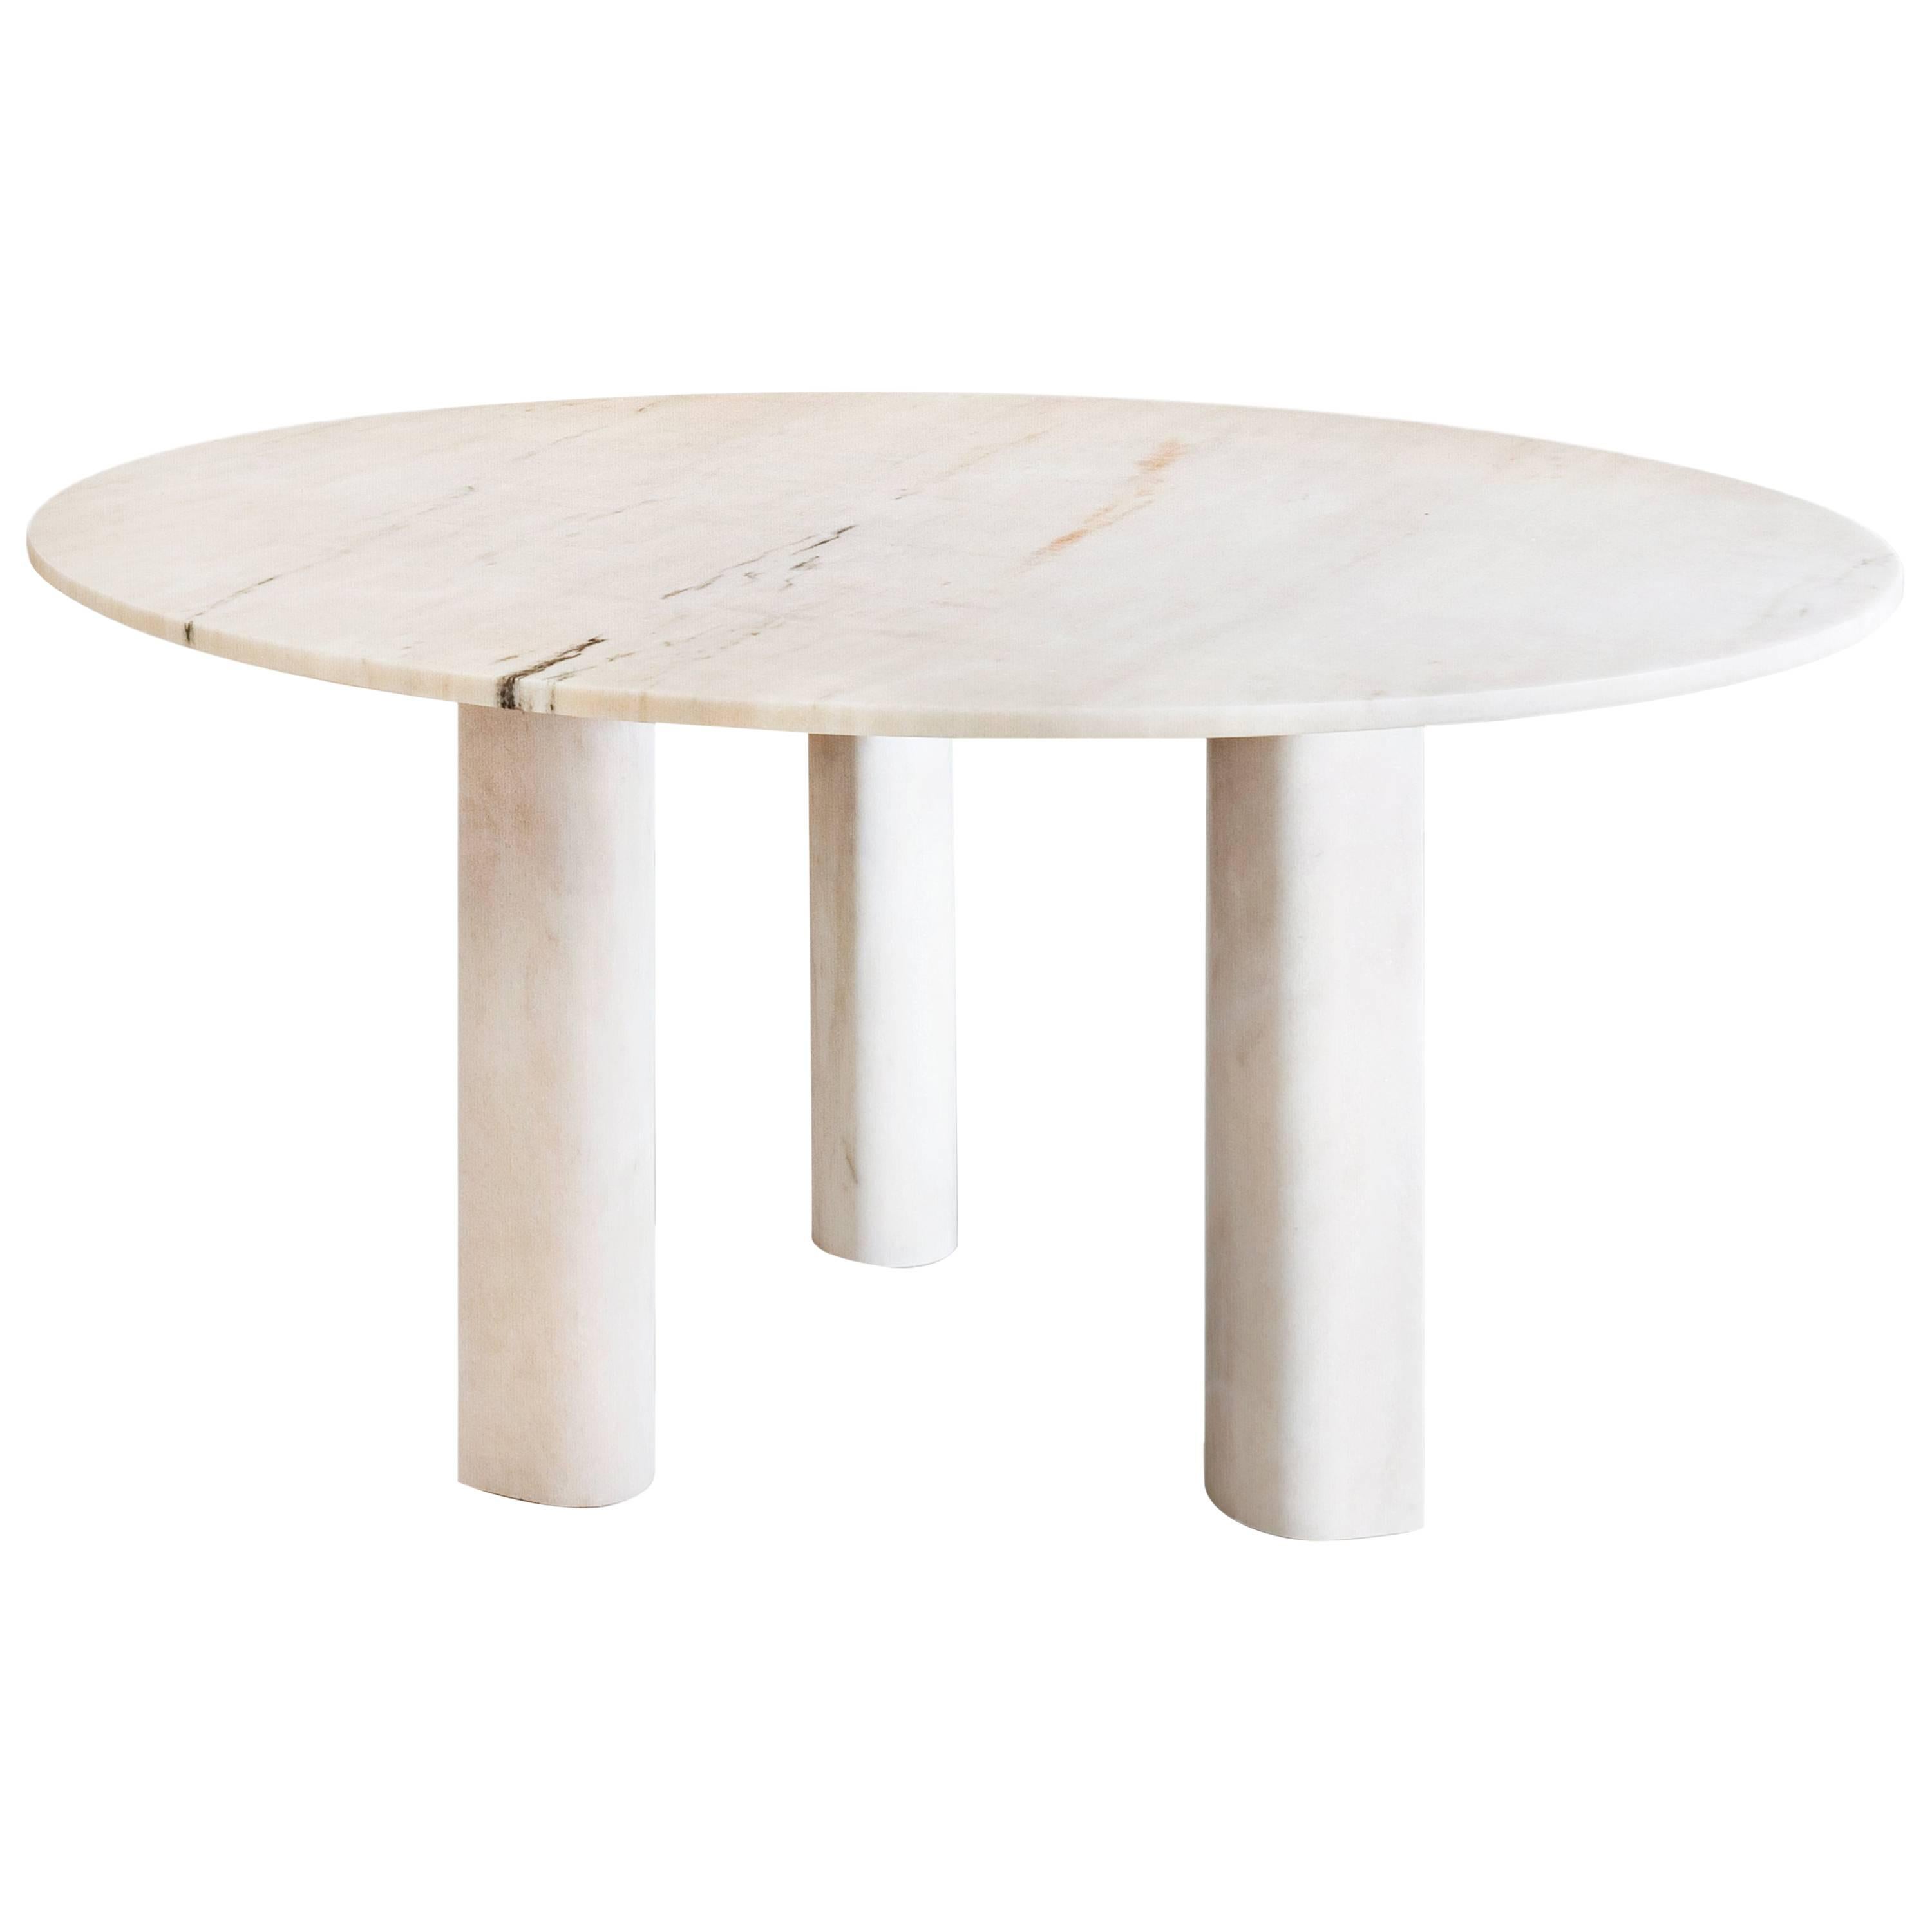 Salvatori 'Love Me, Love Me Not' Round Dining Table in Rosa Portogallo Marble For Sale